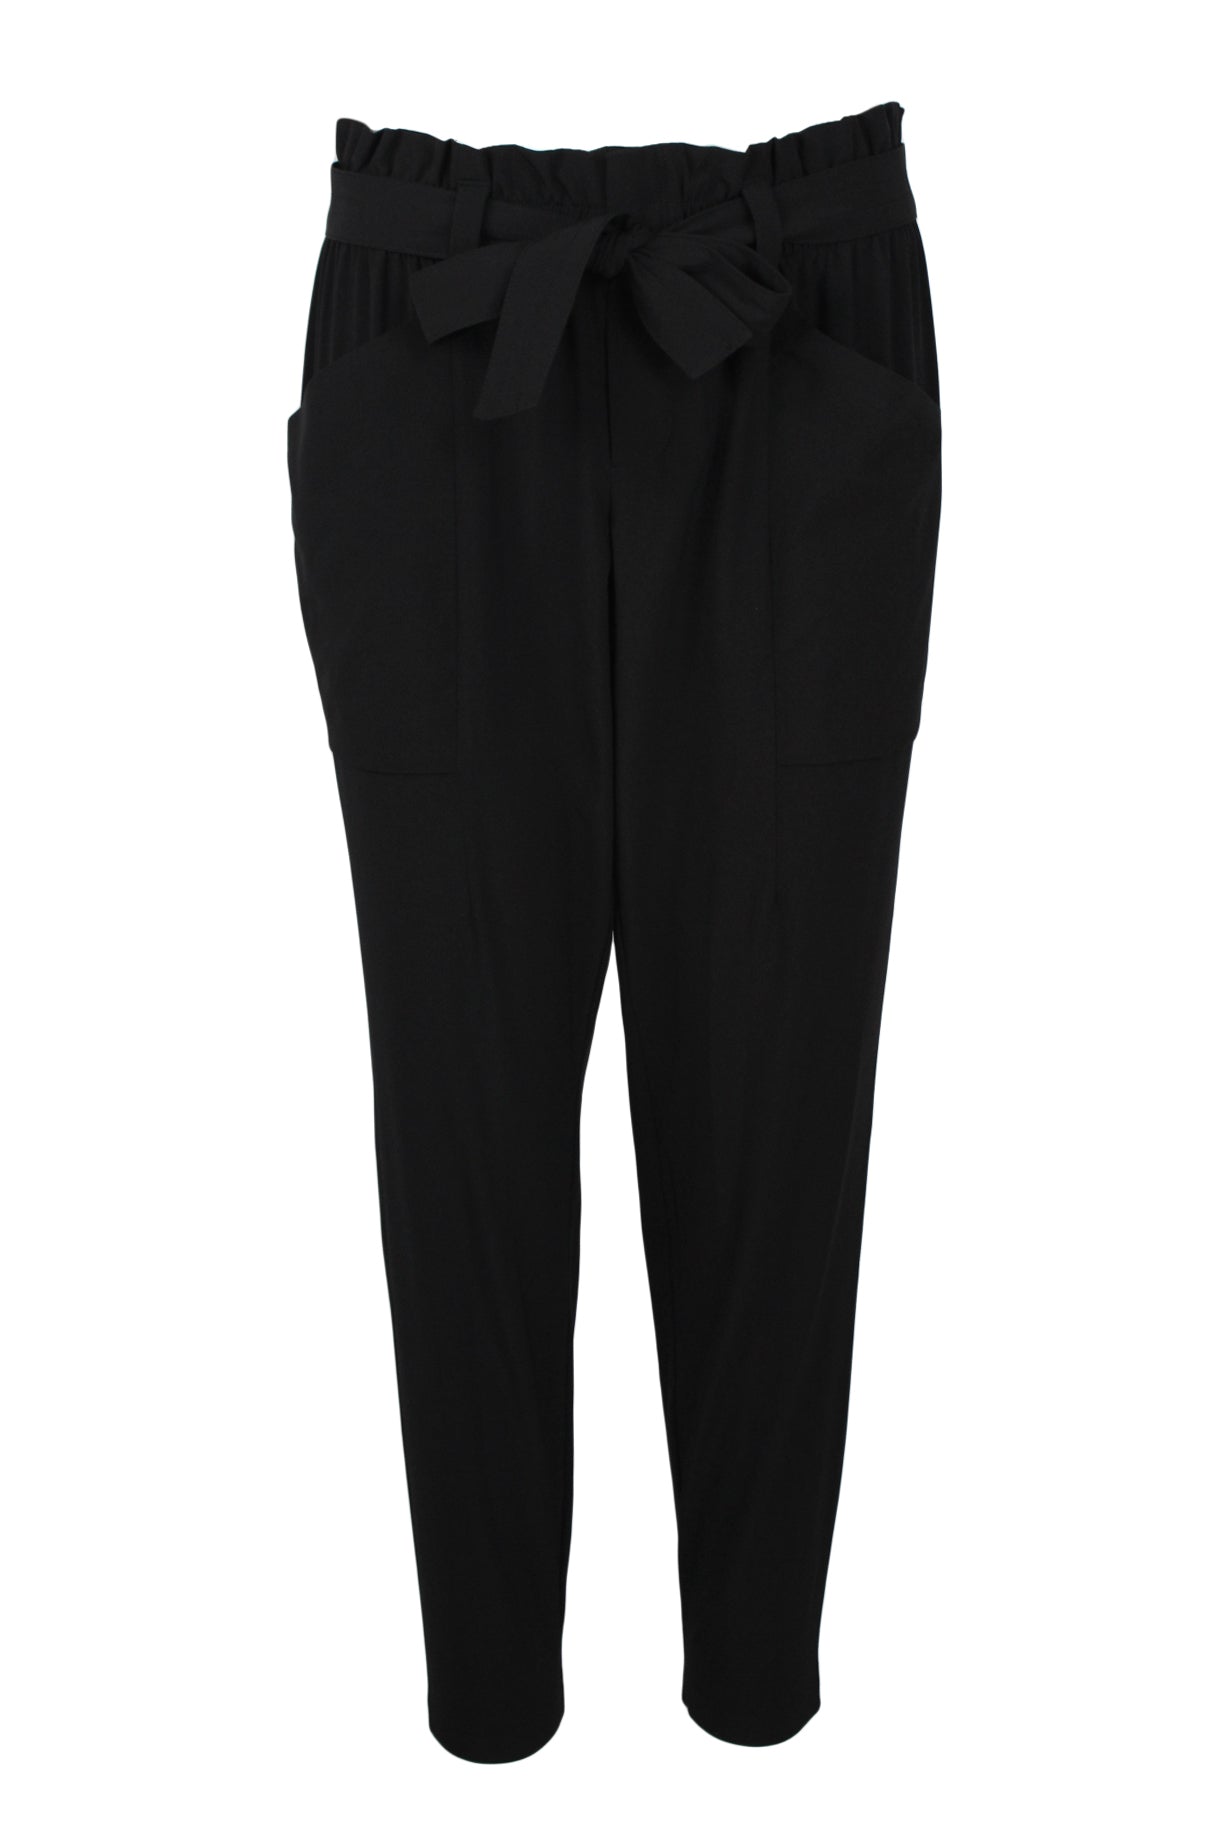 front of athleta black tie pants. features elasticized waist, self tie belt, pockets at side, zip fly and hook closure.; relaxed fit.